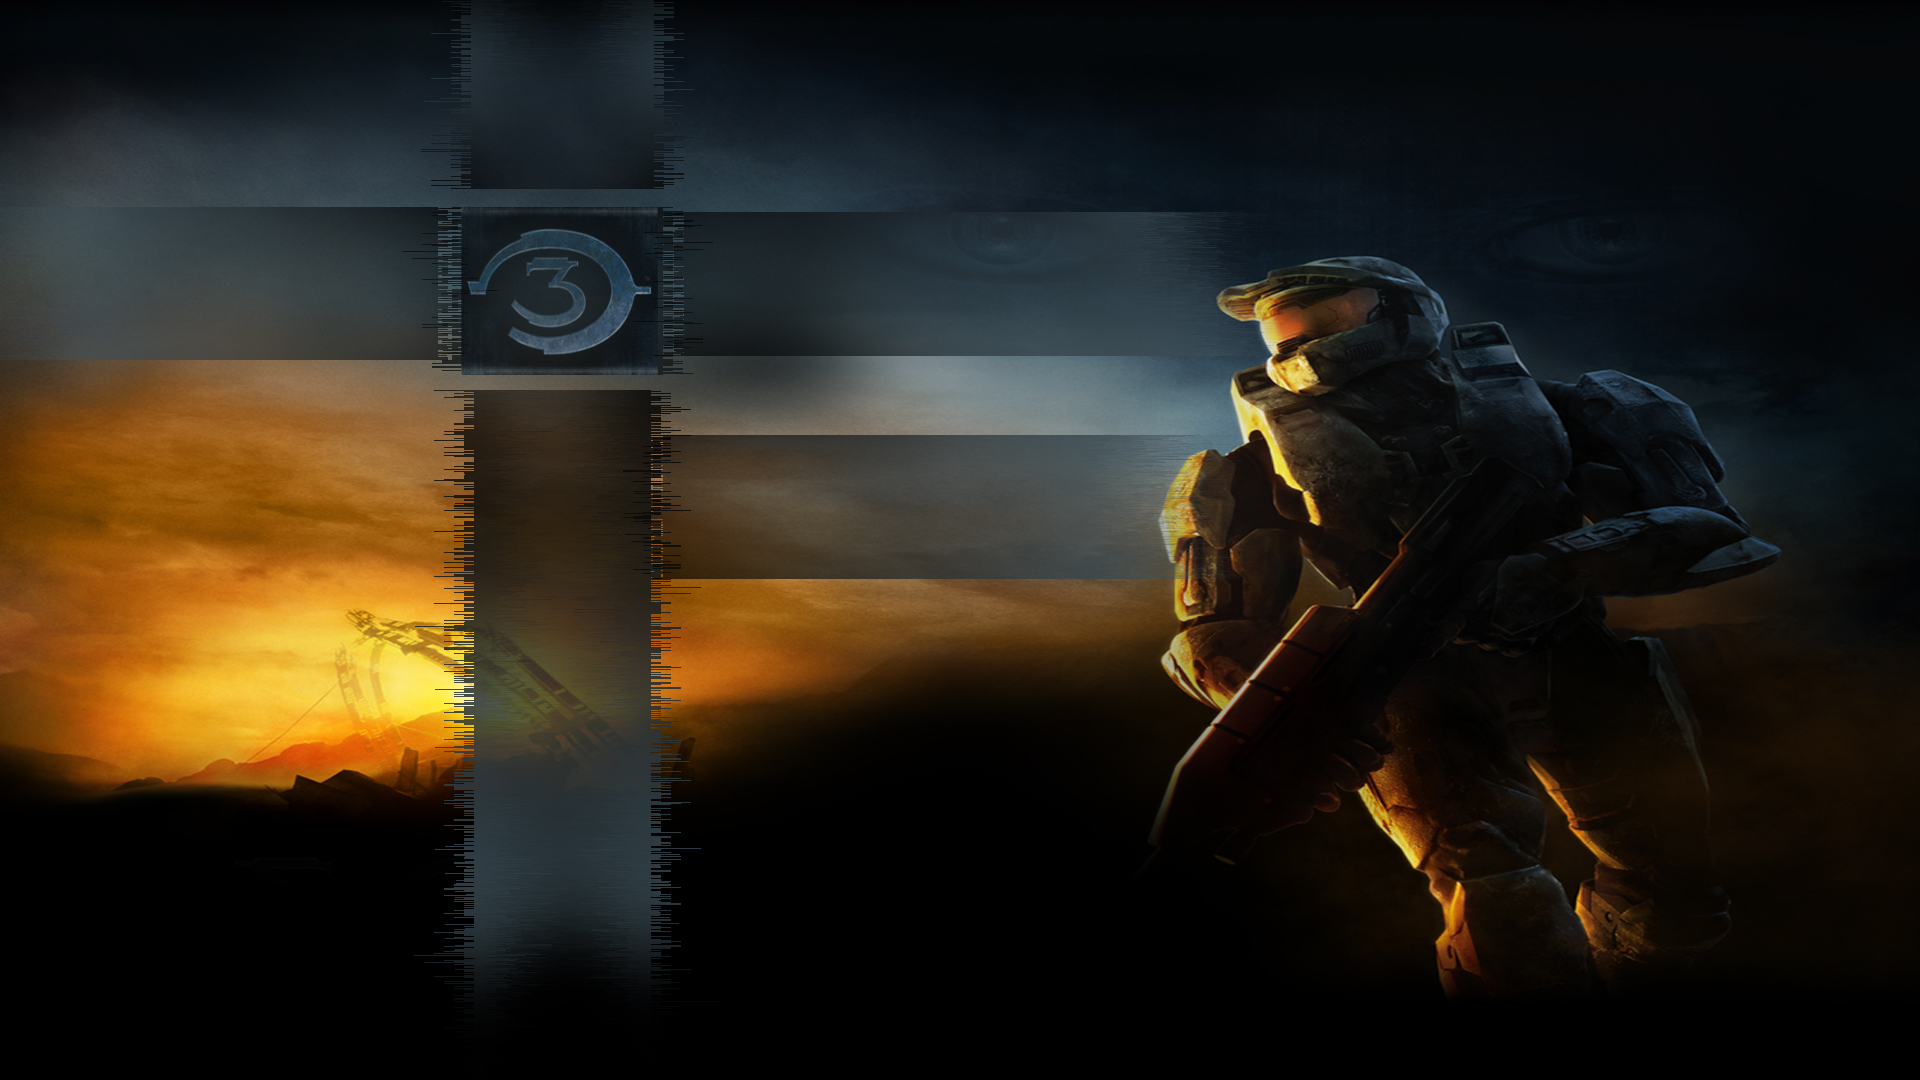 Ps3 Wallpaper 23 - Halo Background , HD Wallpaper & Backgrounds